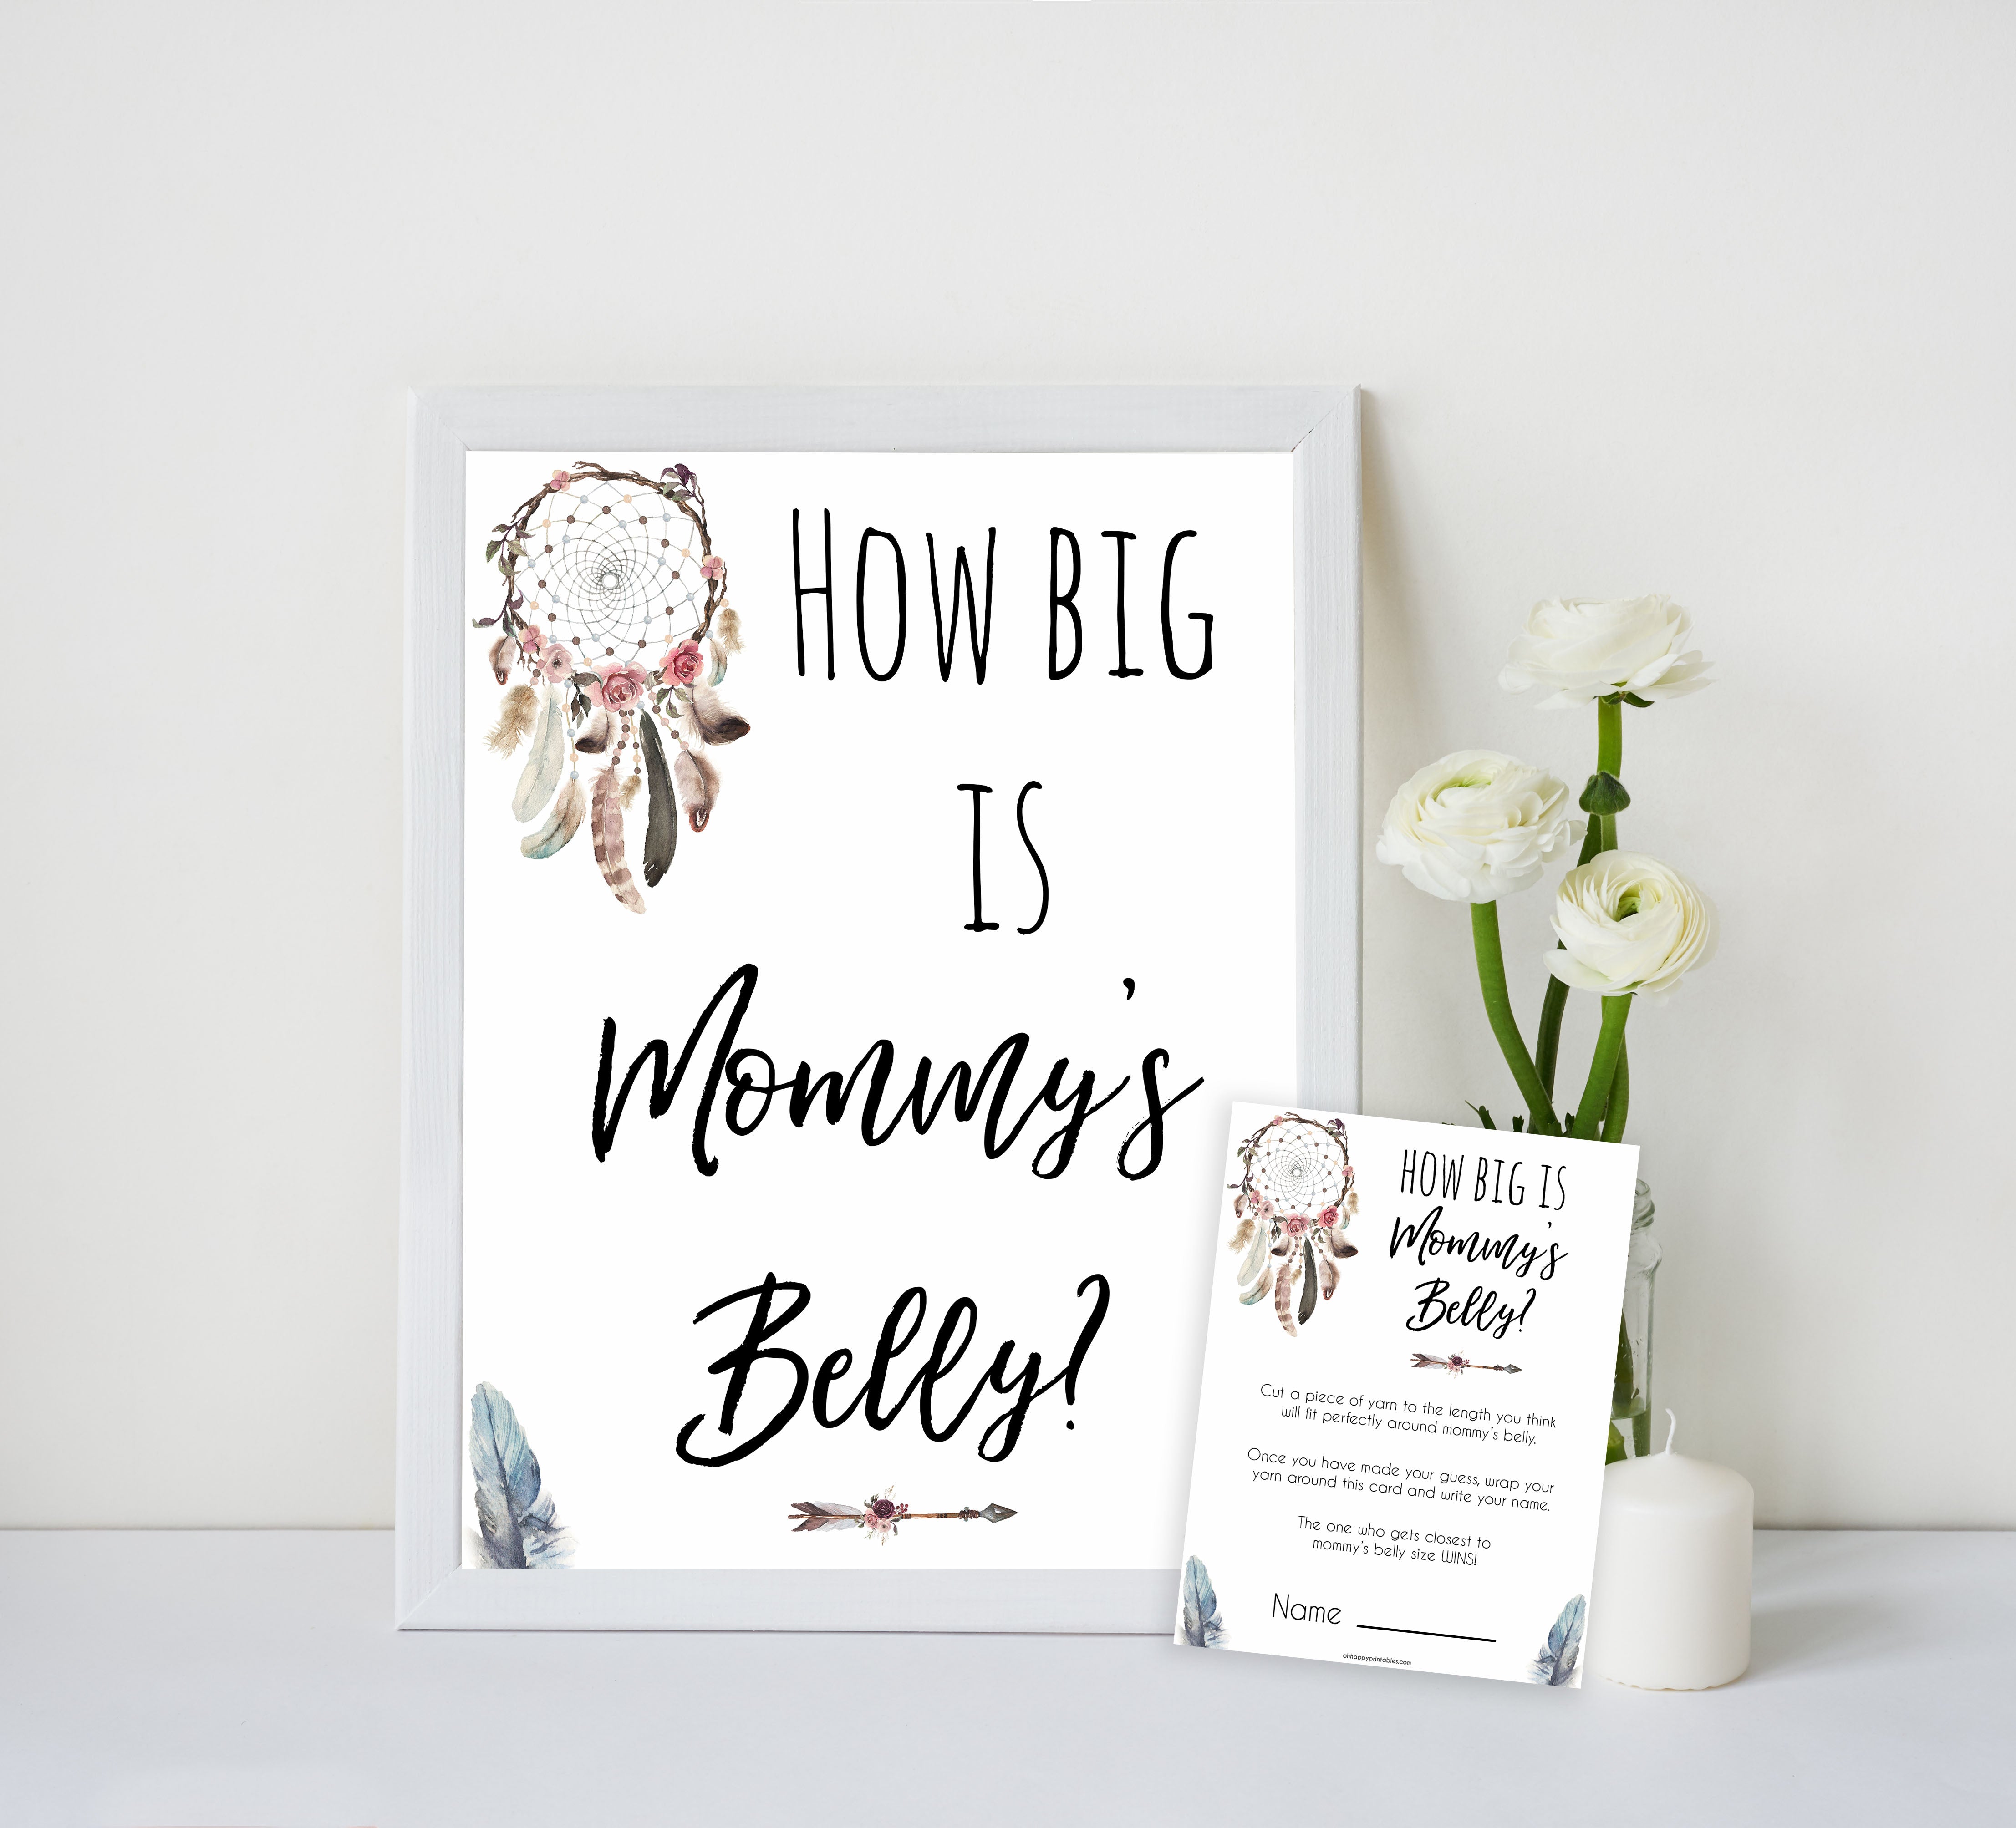 Boho baby games, how big is mommys belly baby game, fun baby games, printable baby games, top 10 baby games, boho baby shower, baby games, hilarious baby games